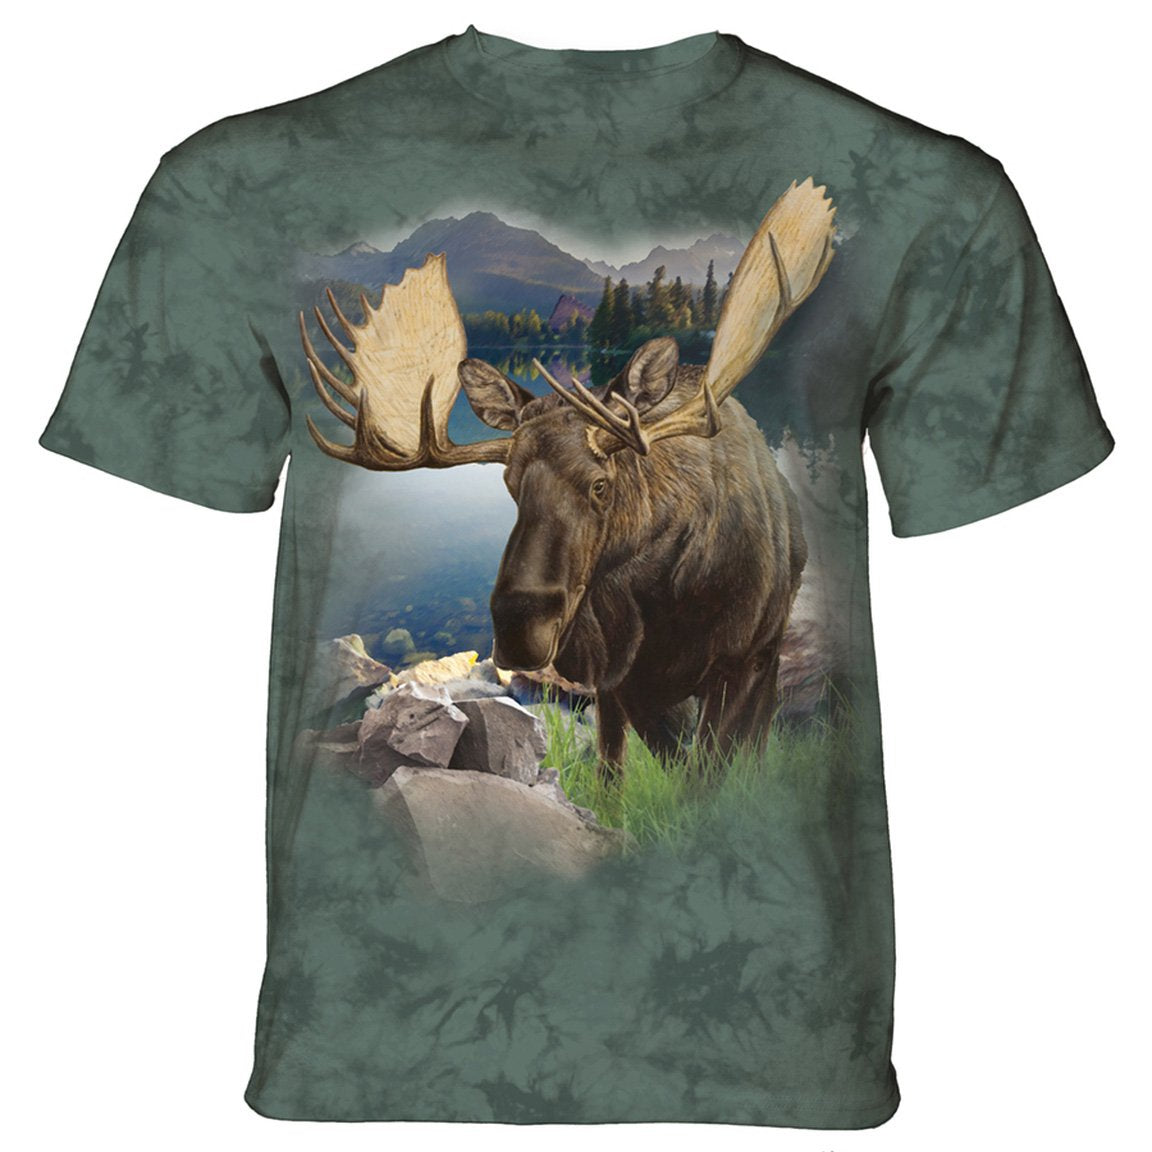 The Mountain Monarch Of The Forest - T-Shirt